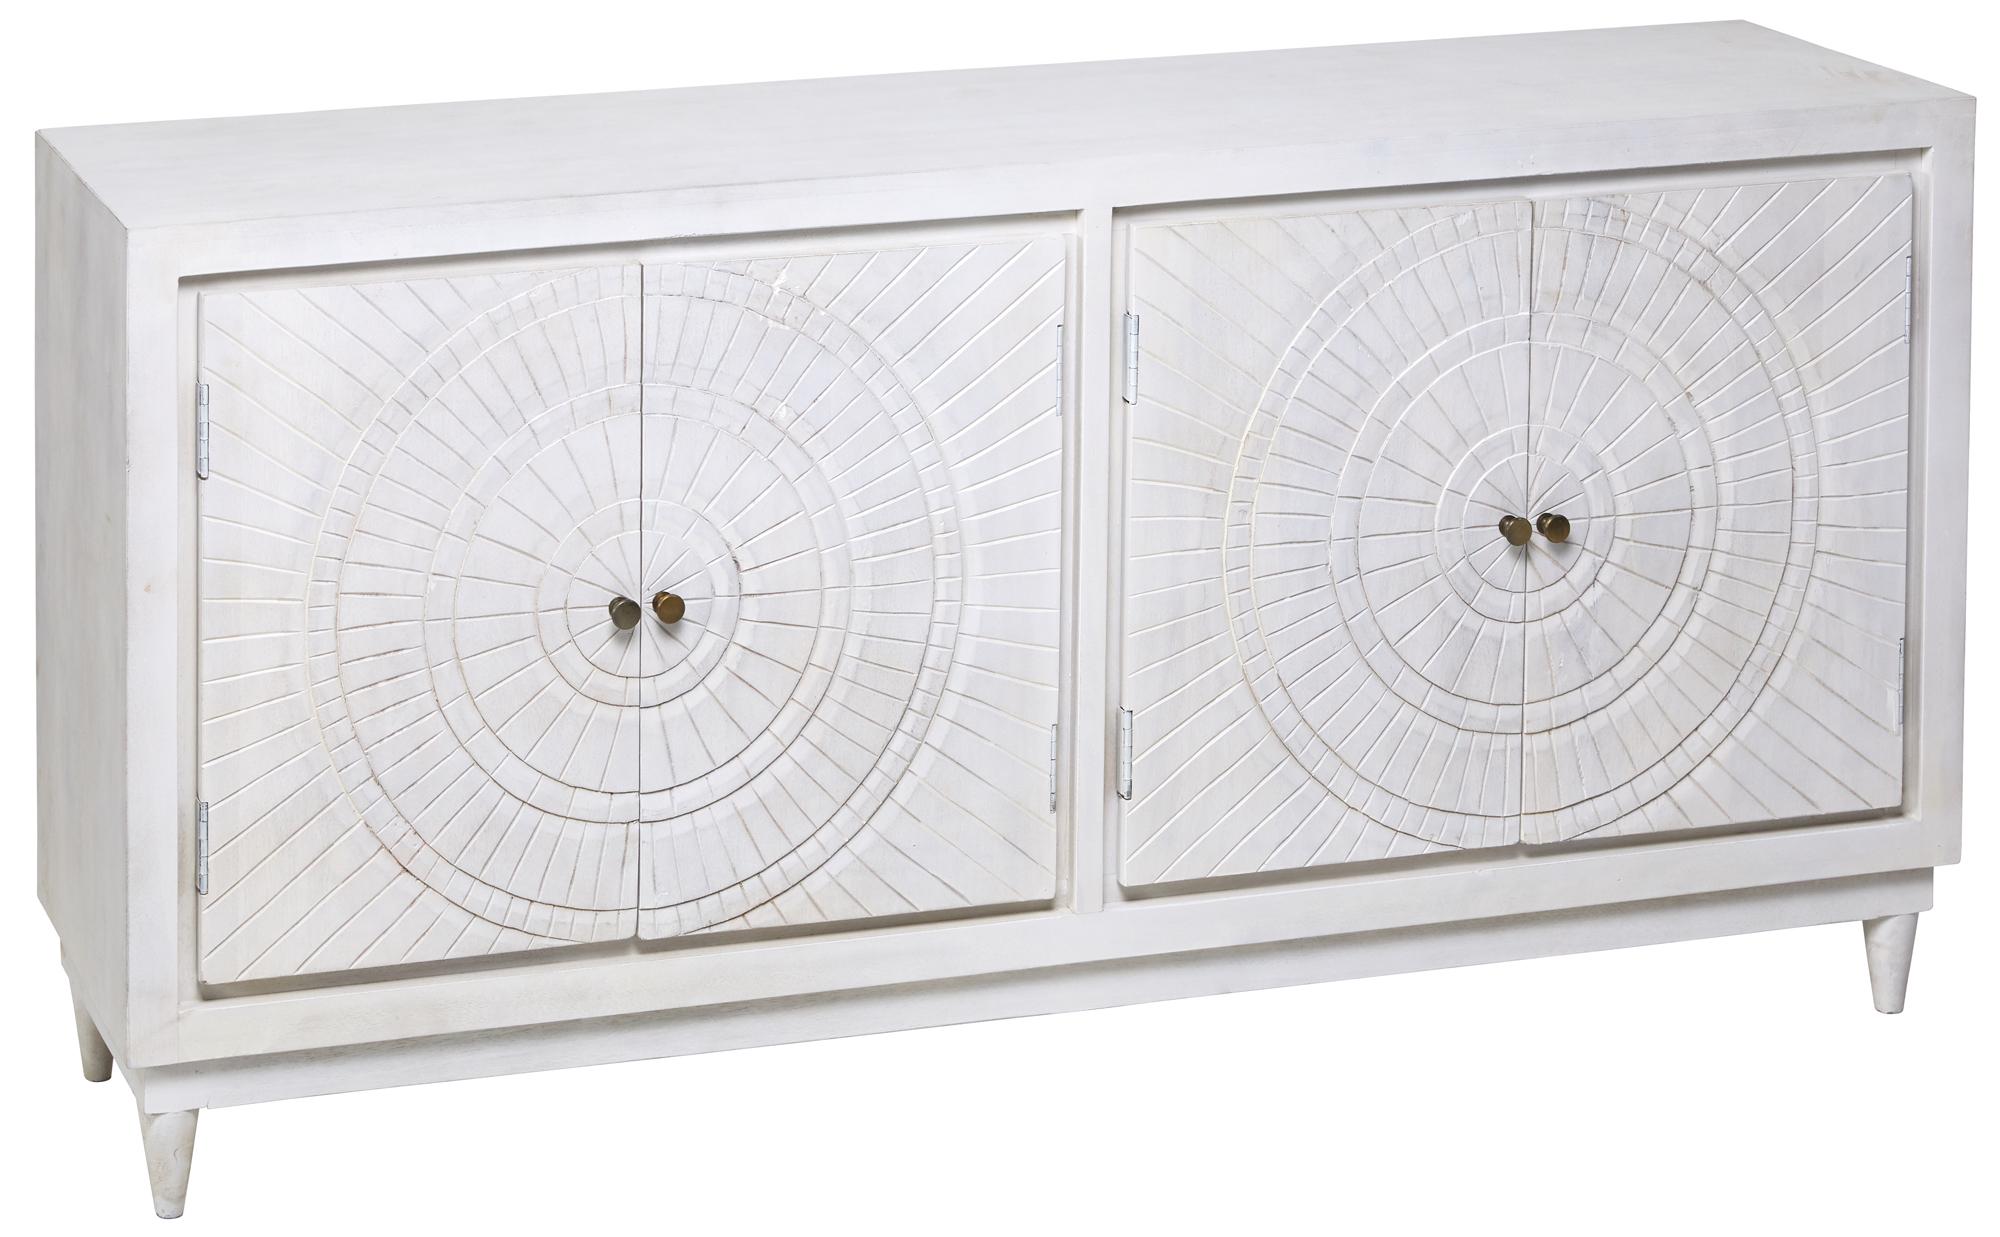 Transitional Sideboard EIP-11462 Lucent EIP-11462 in whitewash 